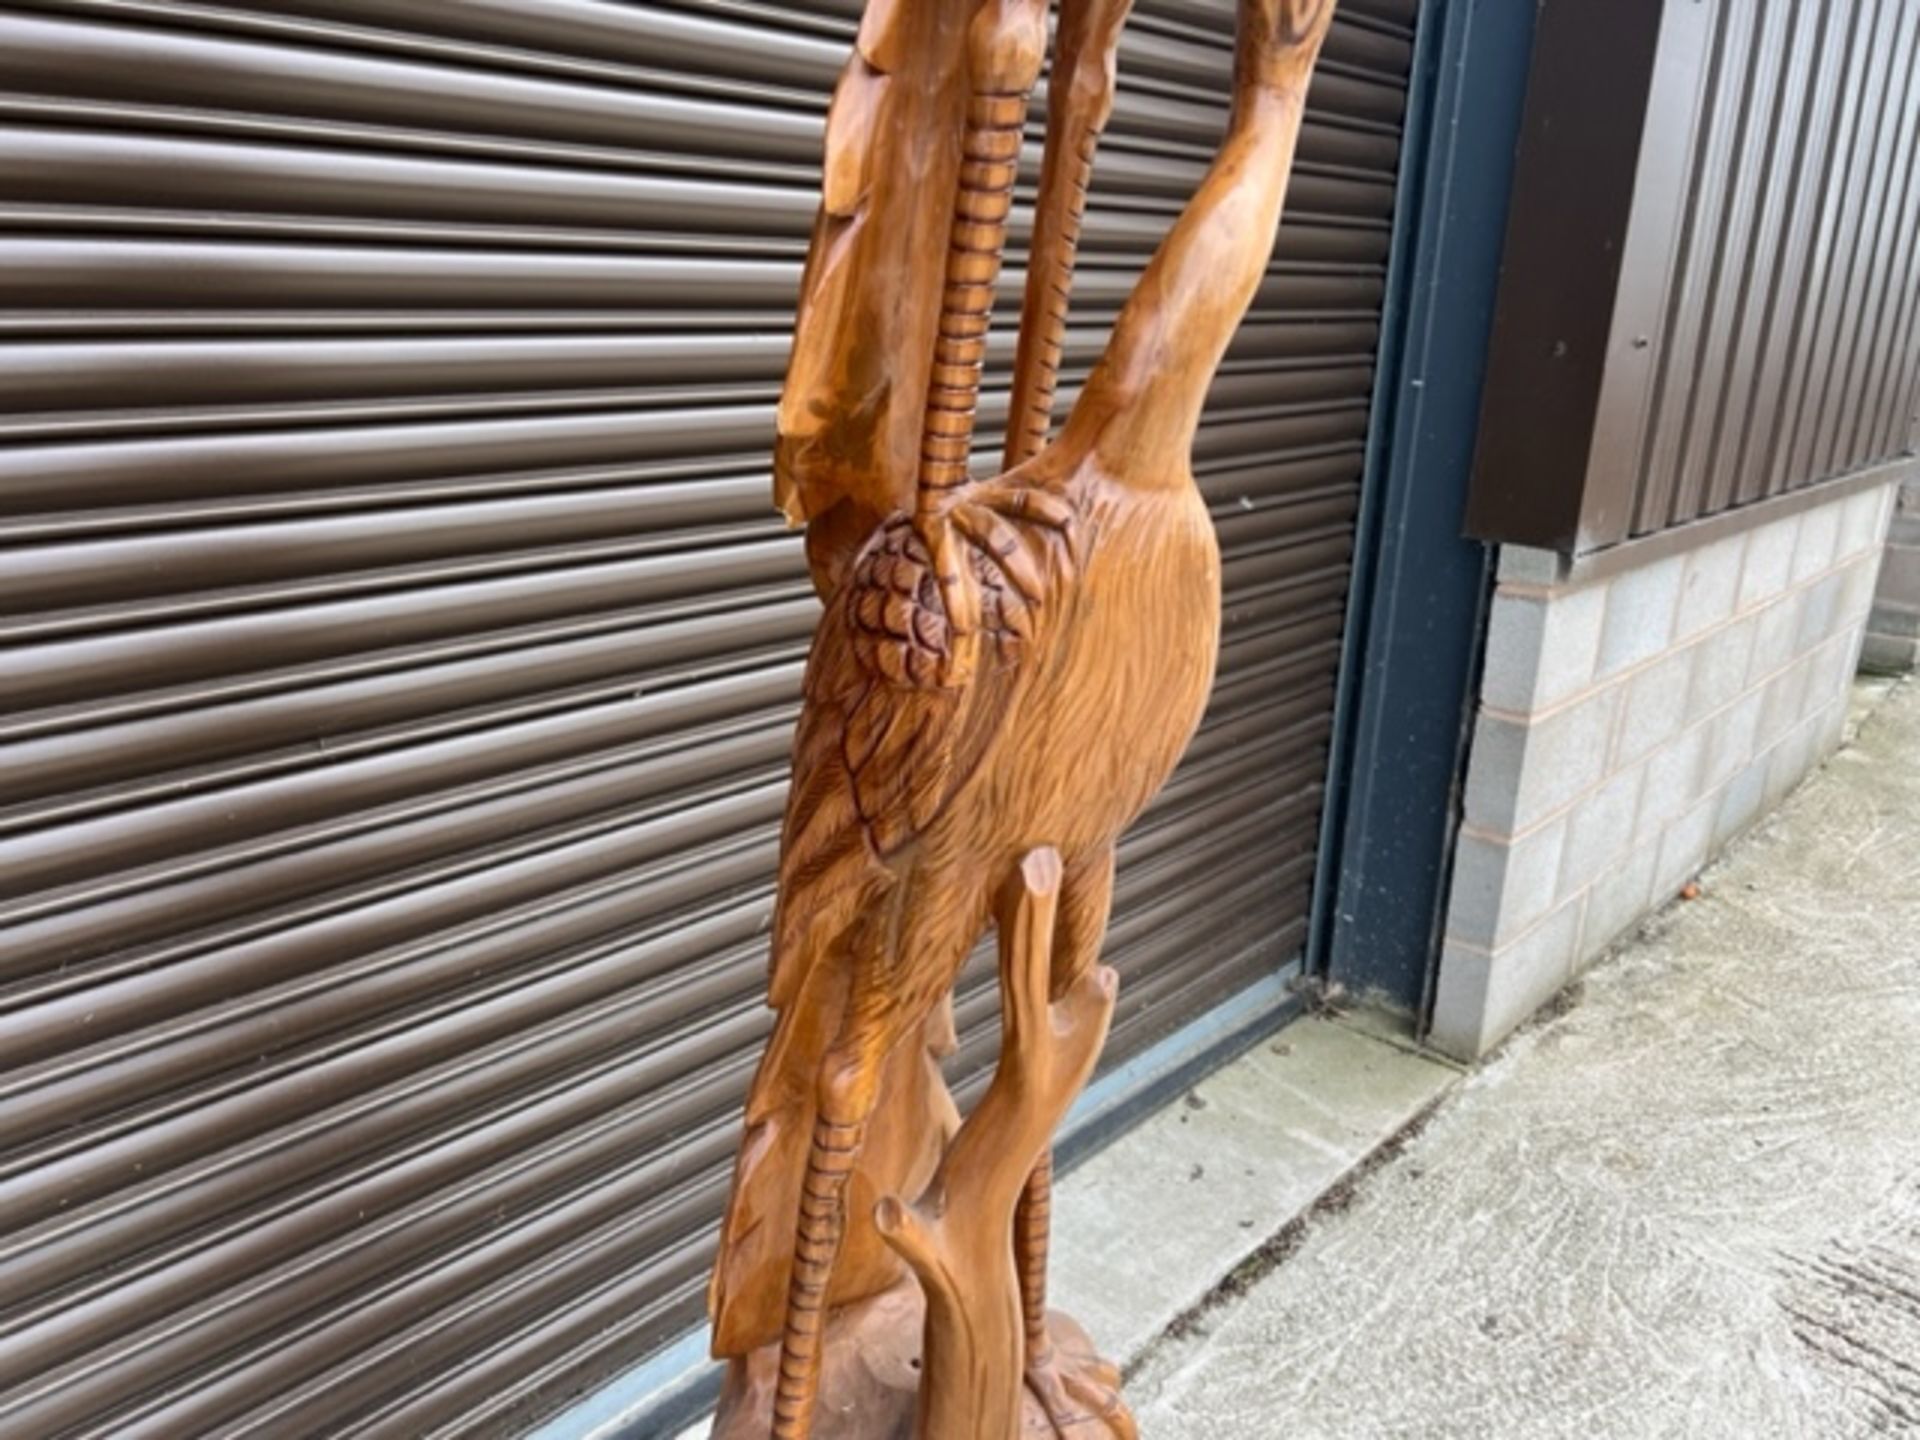 7Ft Tall Wooden Carving Depicting Birds Feeding - Image 5 of 5